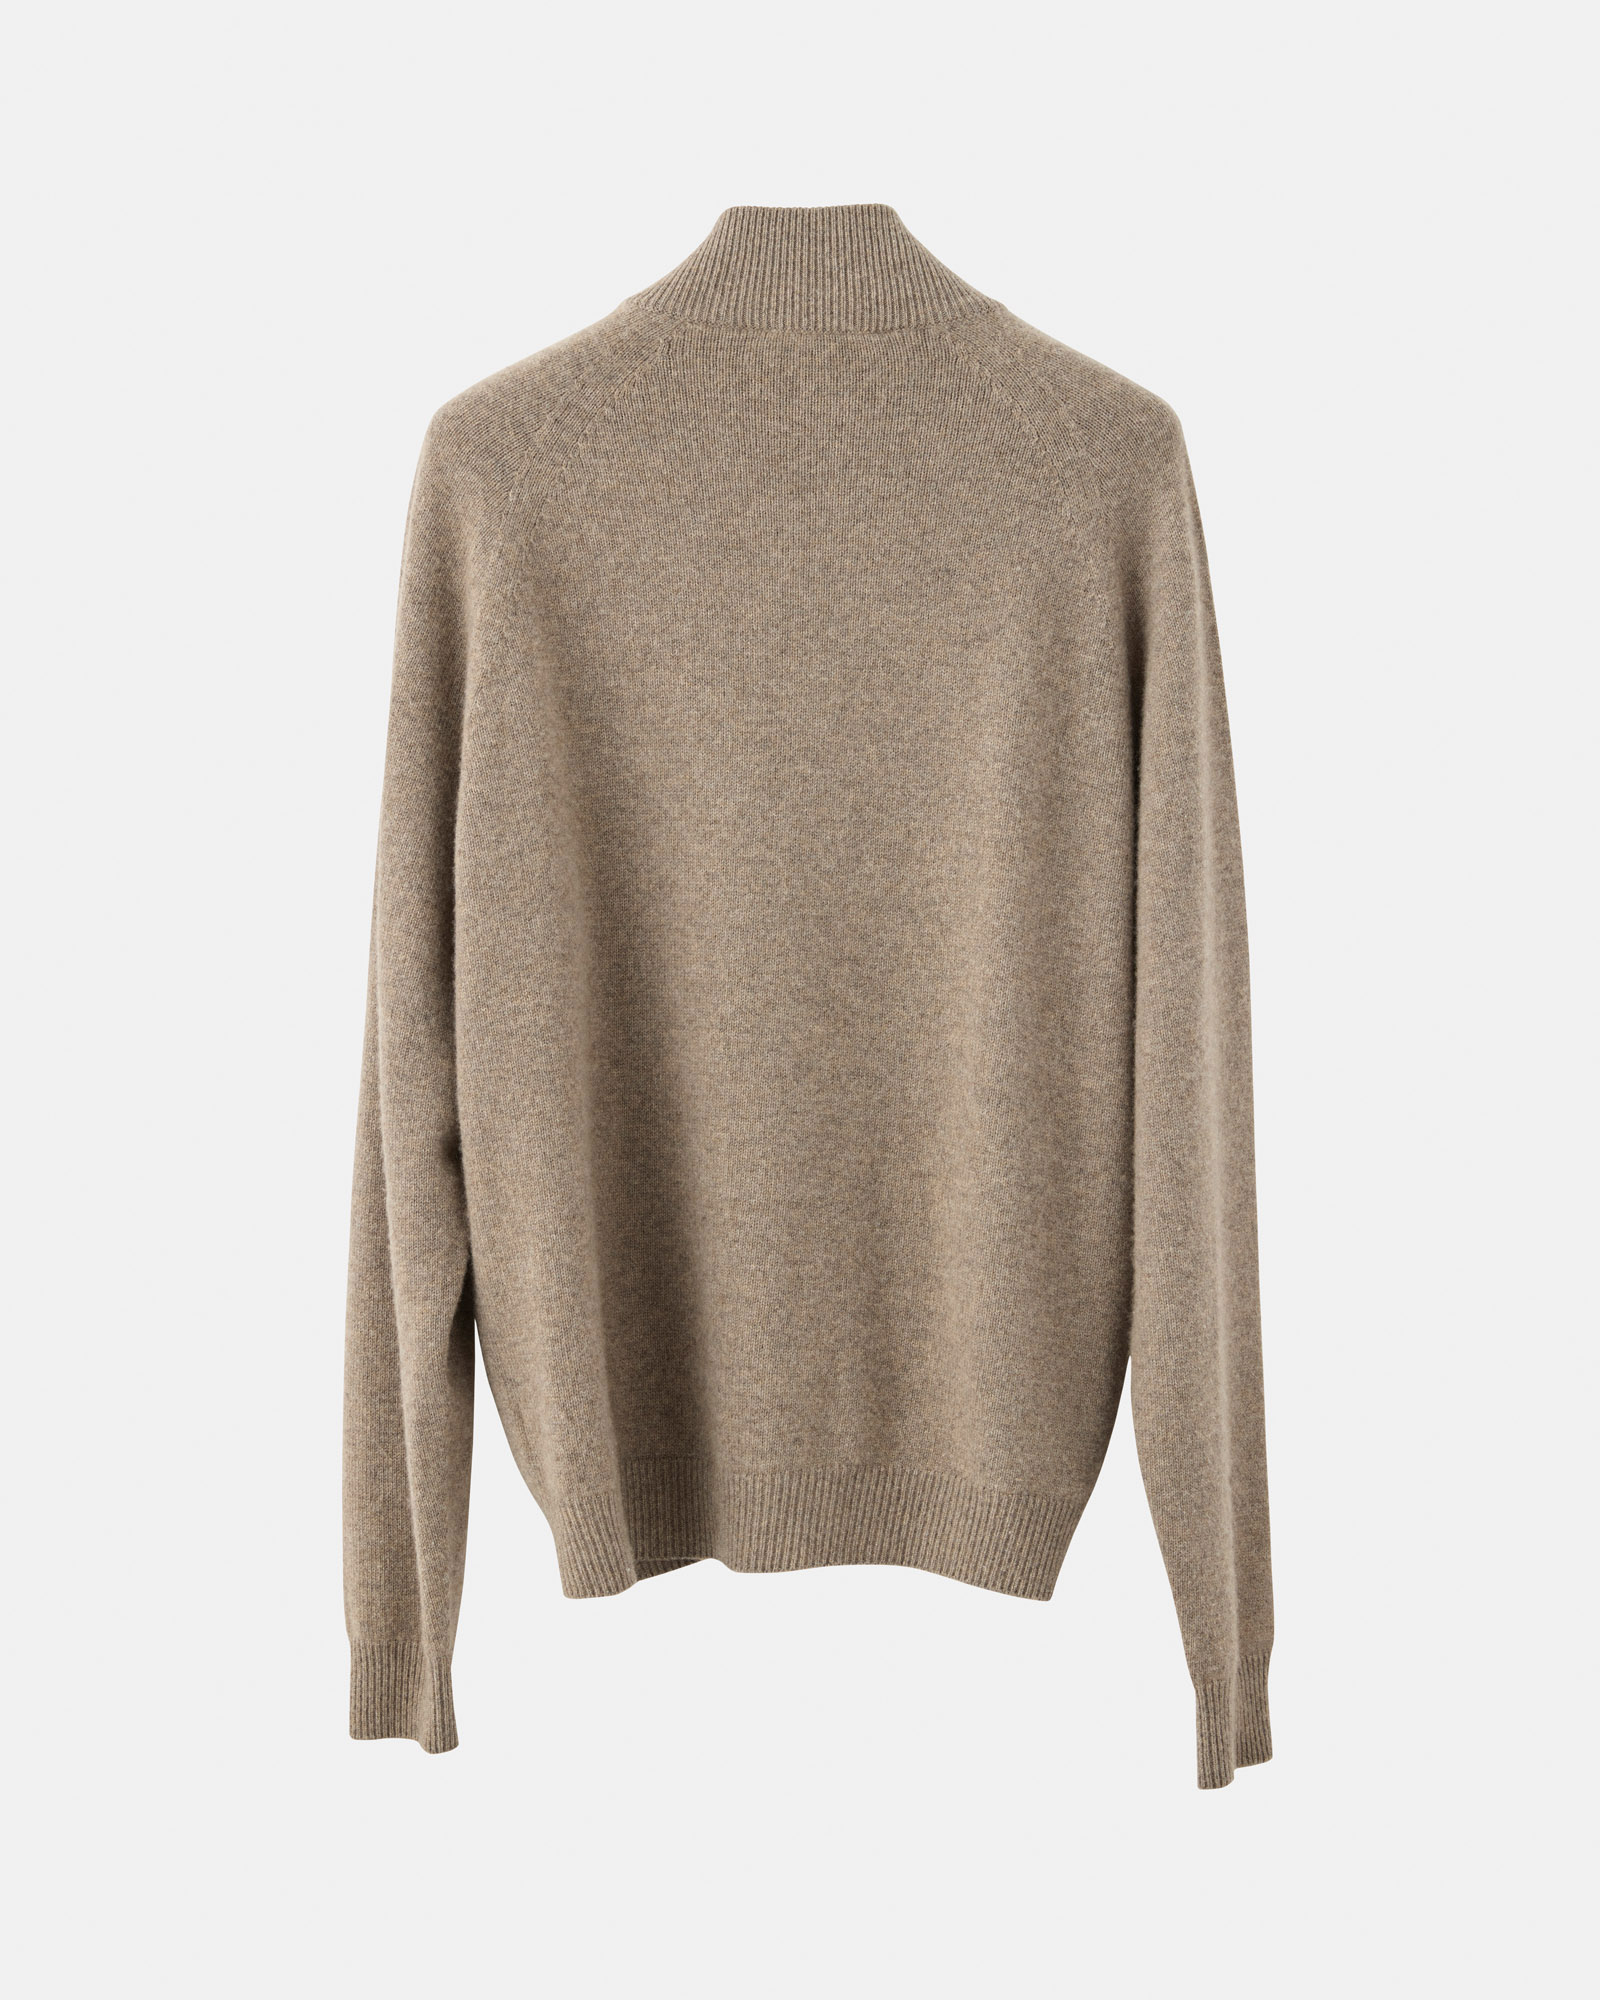 Full zip taupe cashmere image 4